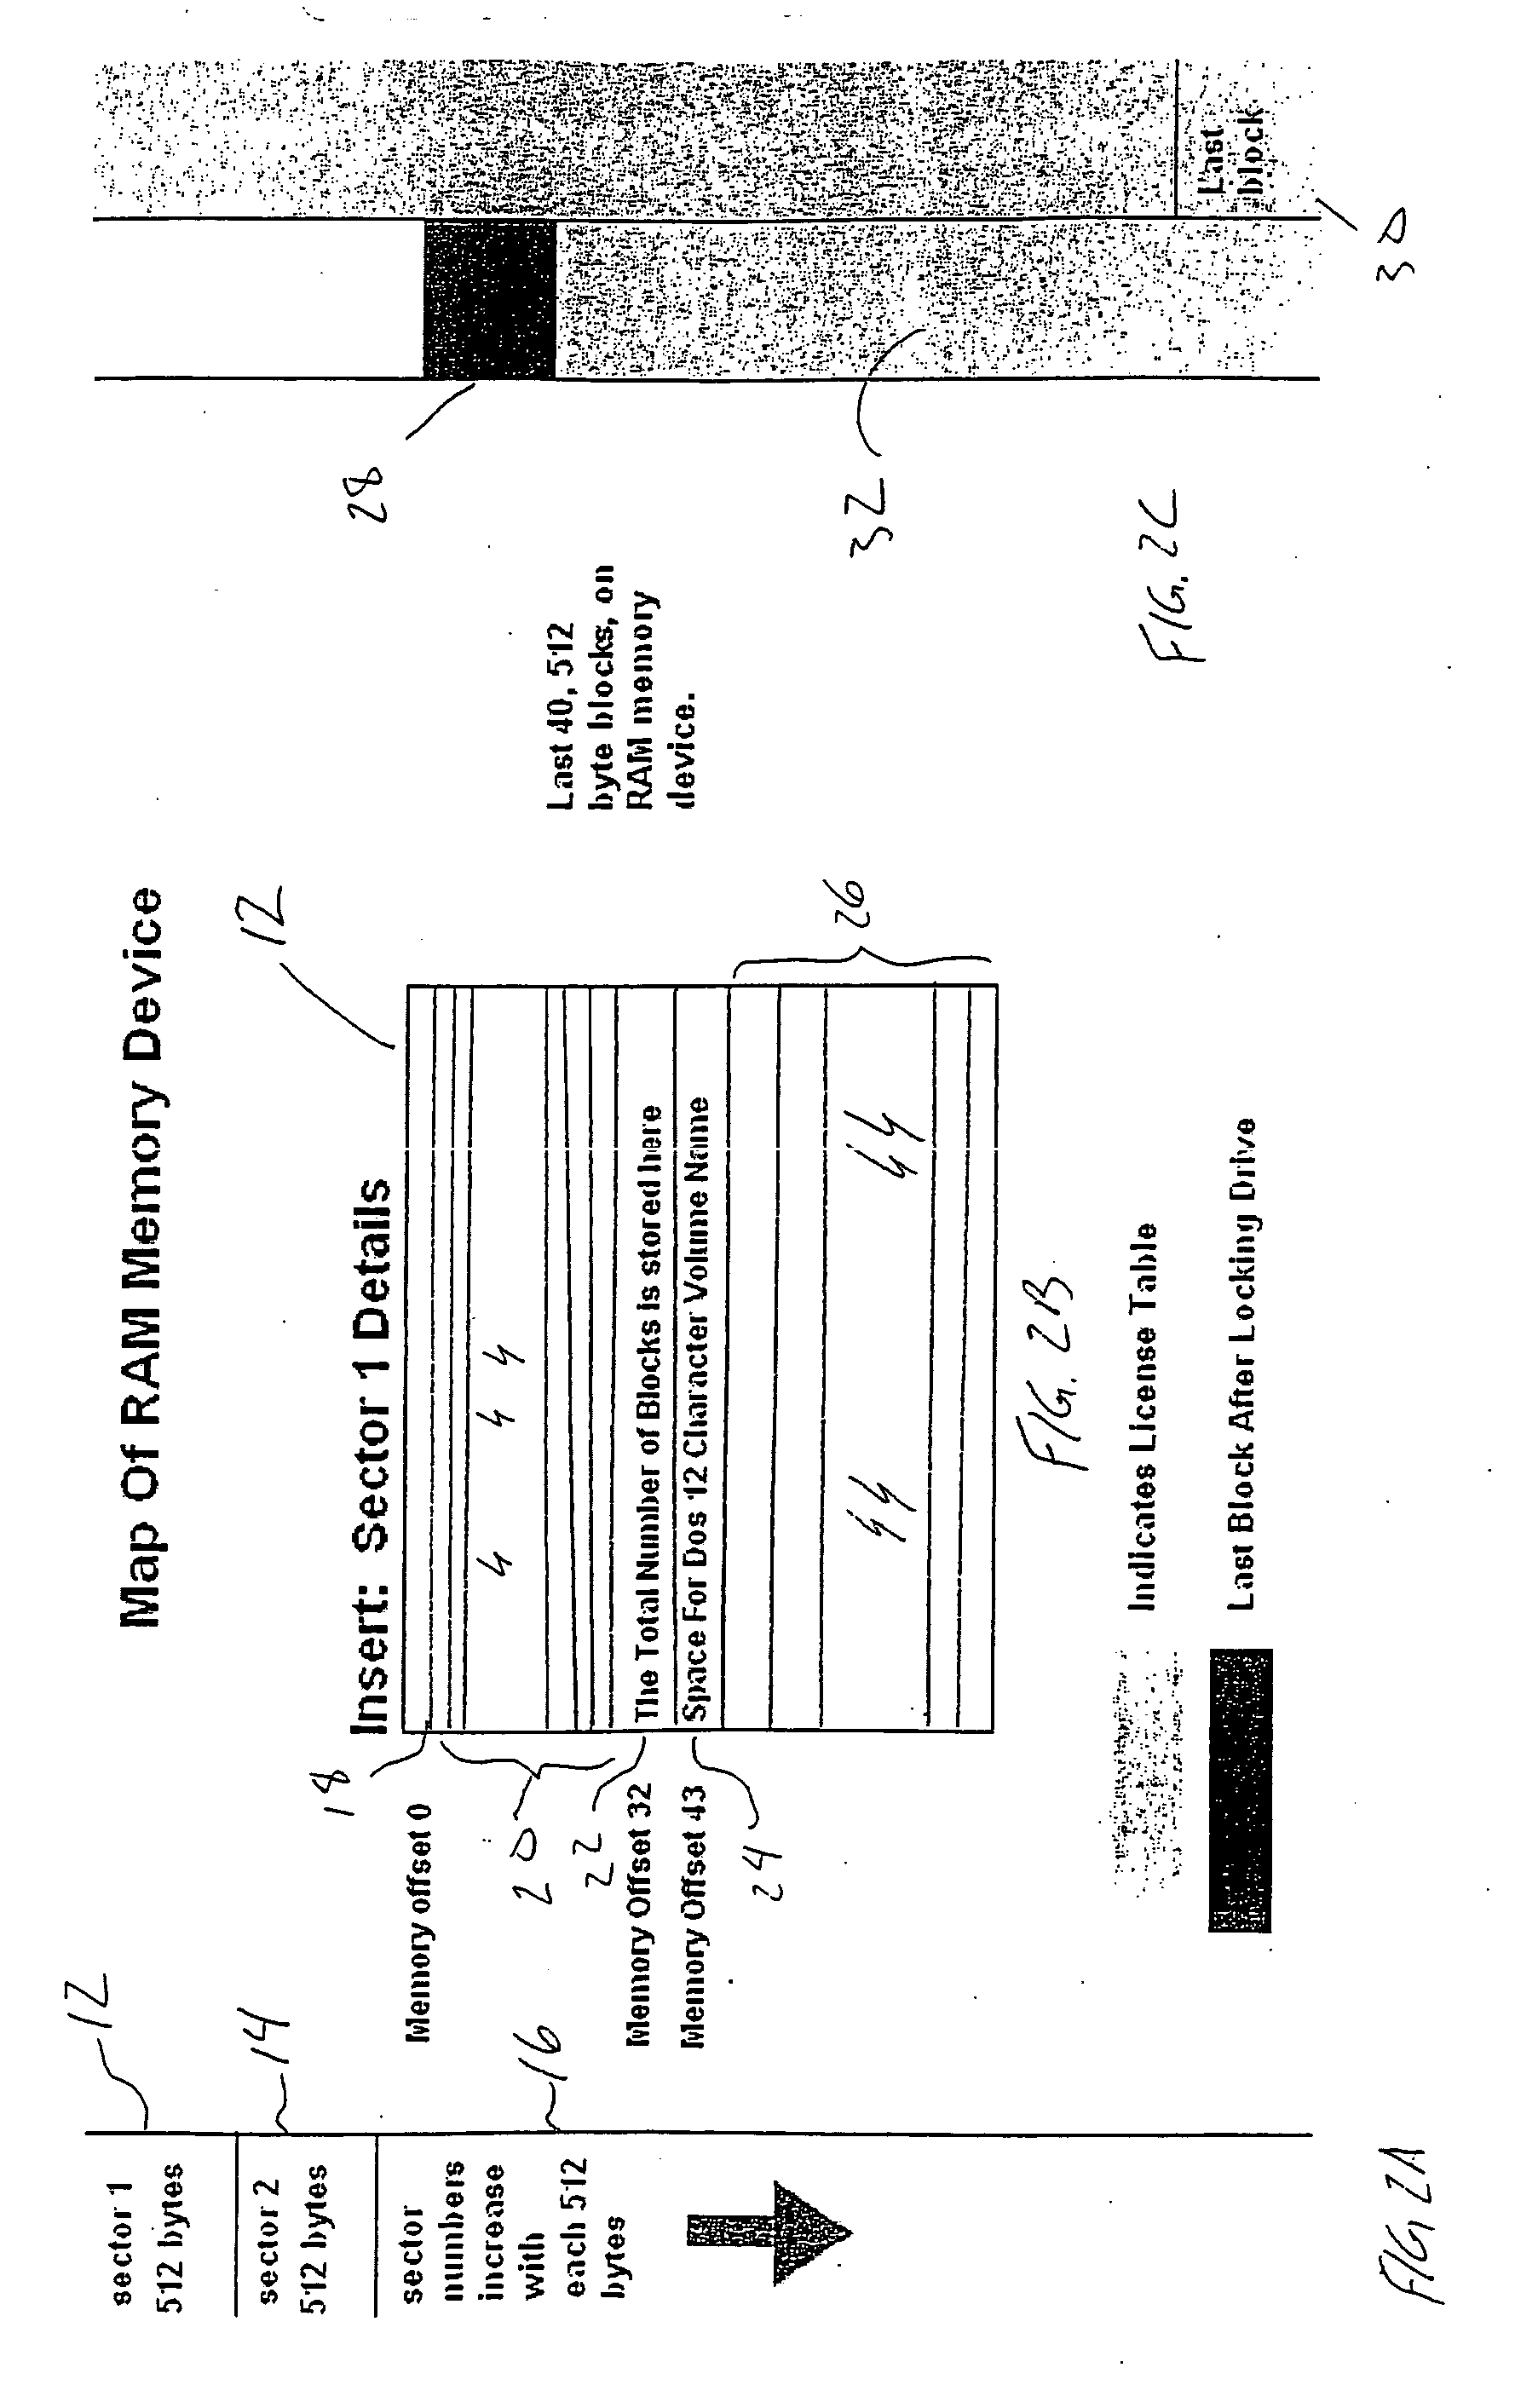 Methods of copy protecting software stored on portable memory